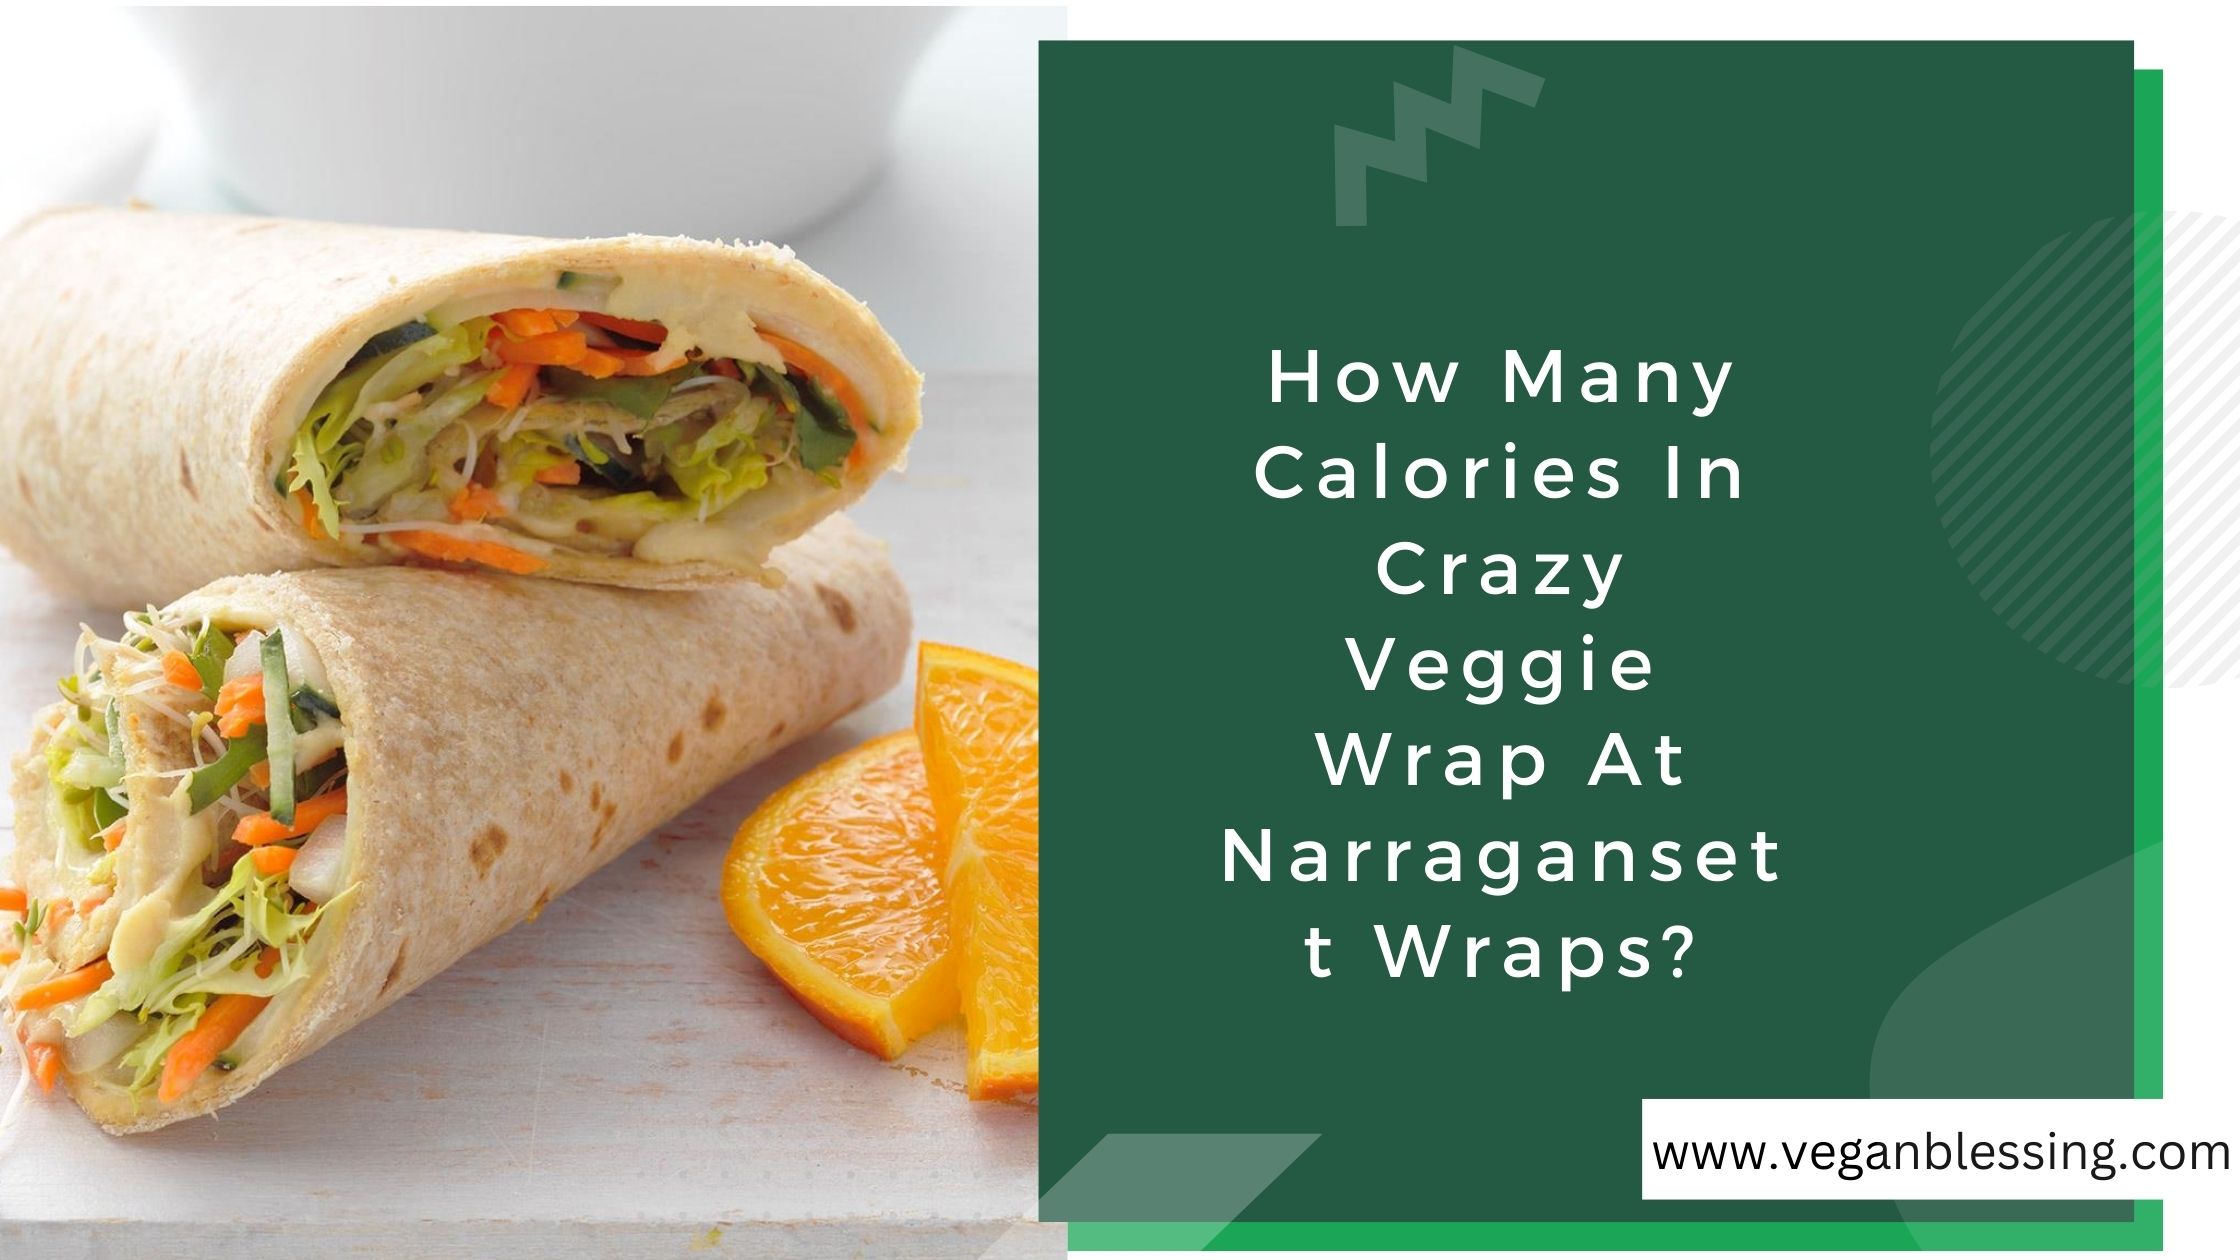 How Many Calories In Crazy Veggie Wrap At Narragansett Wraps? How Many Calories In Crazy Veggie Wrap At Narragansett Wraps